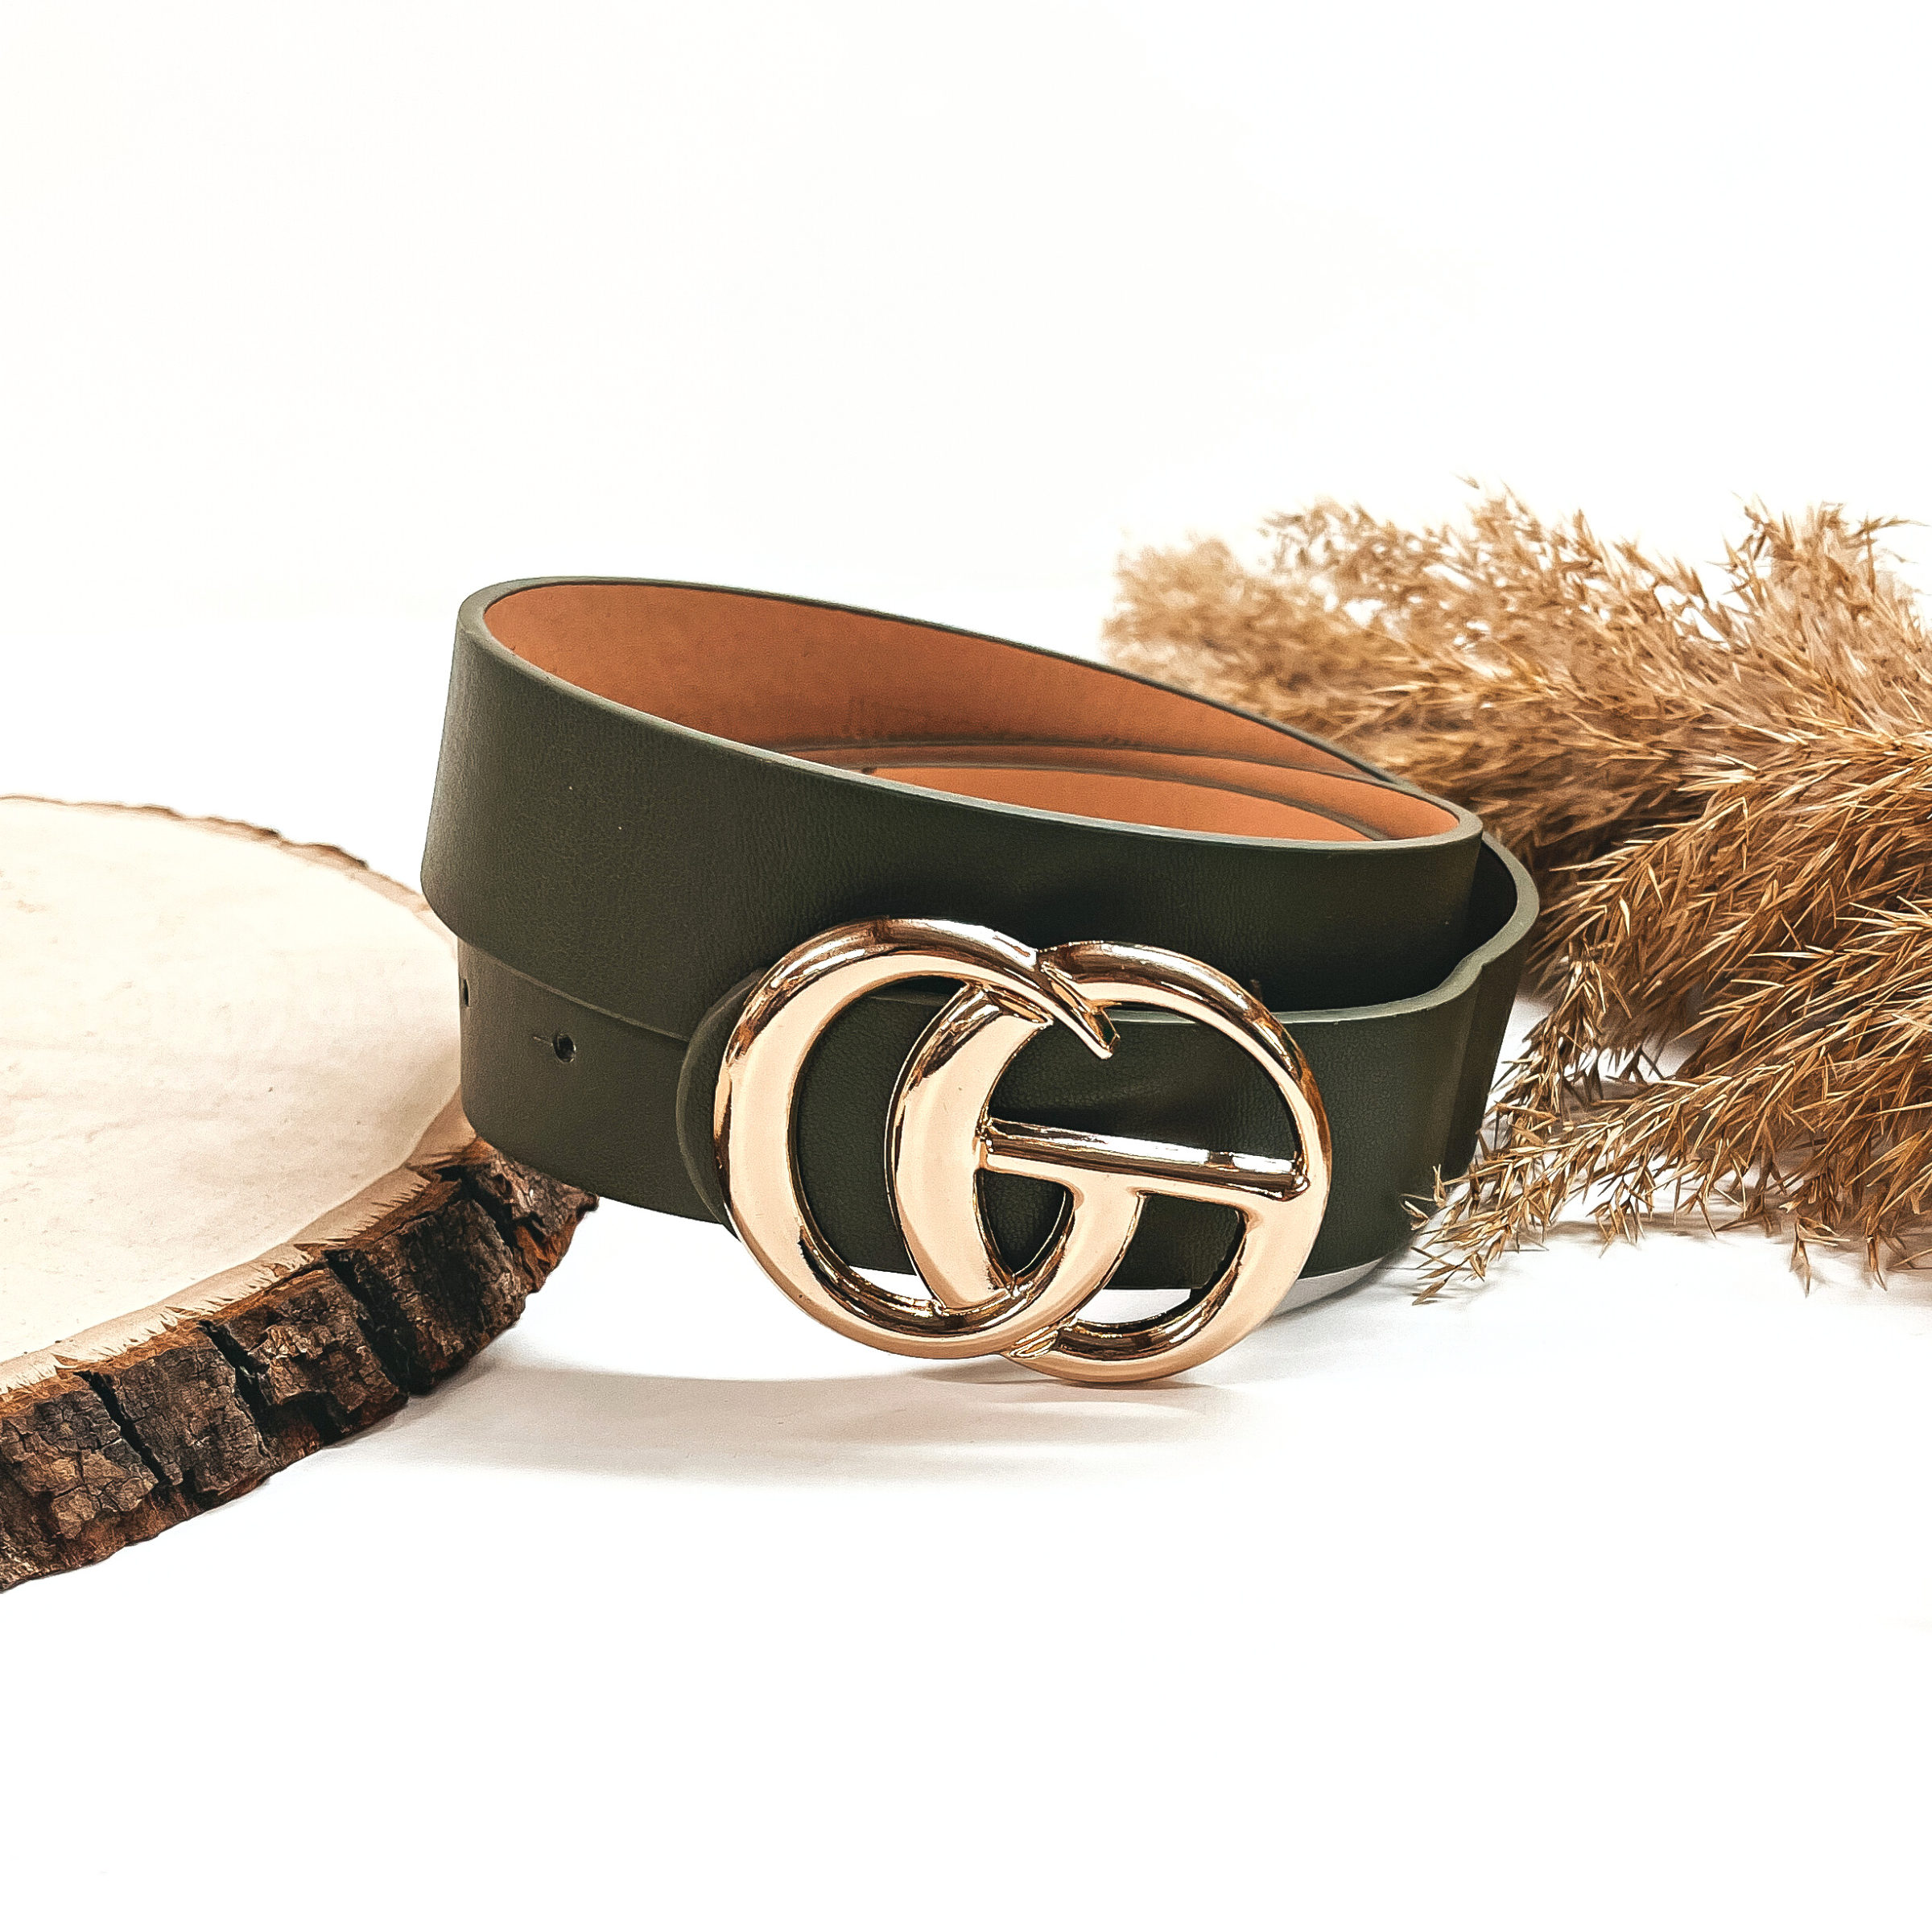 This is a olive green rolled up belt with a gold buckle in the center. This belt  is placed on a slab of wood and on a white background, there is a brown plant  in the back as decor.